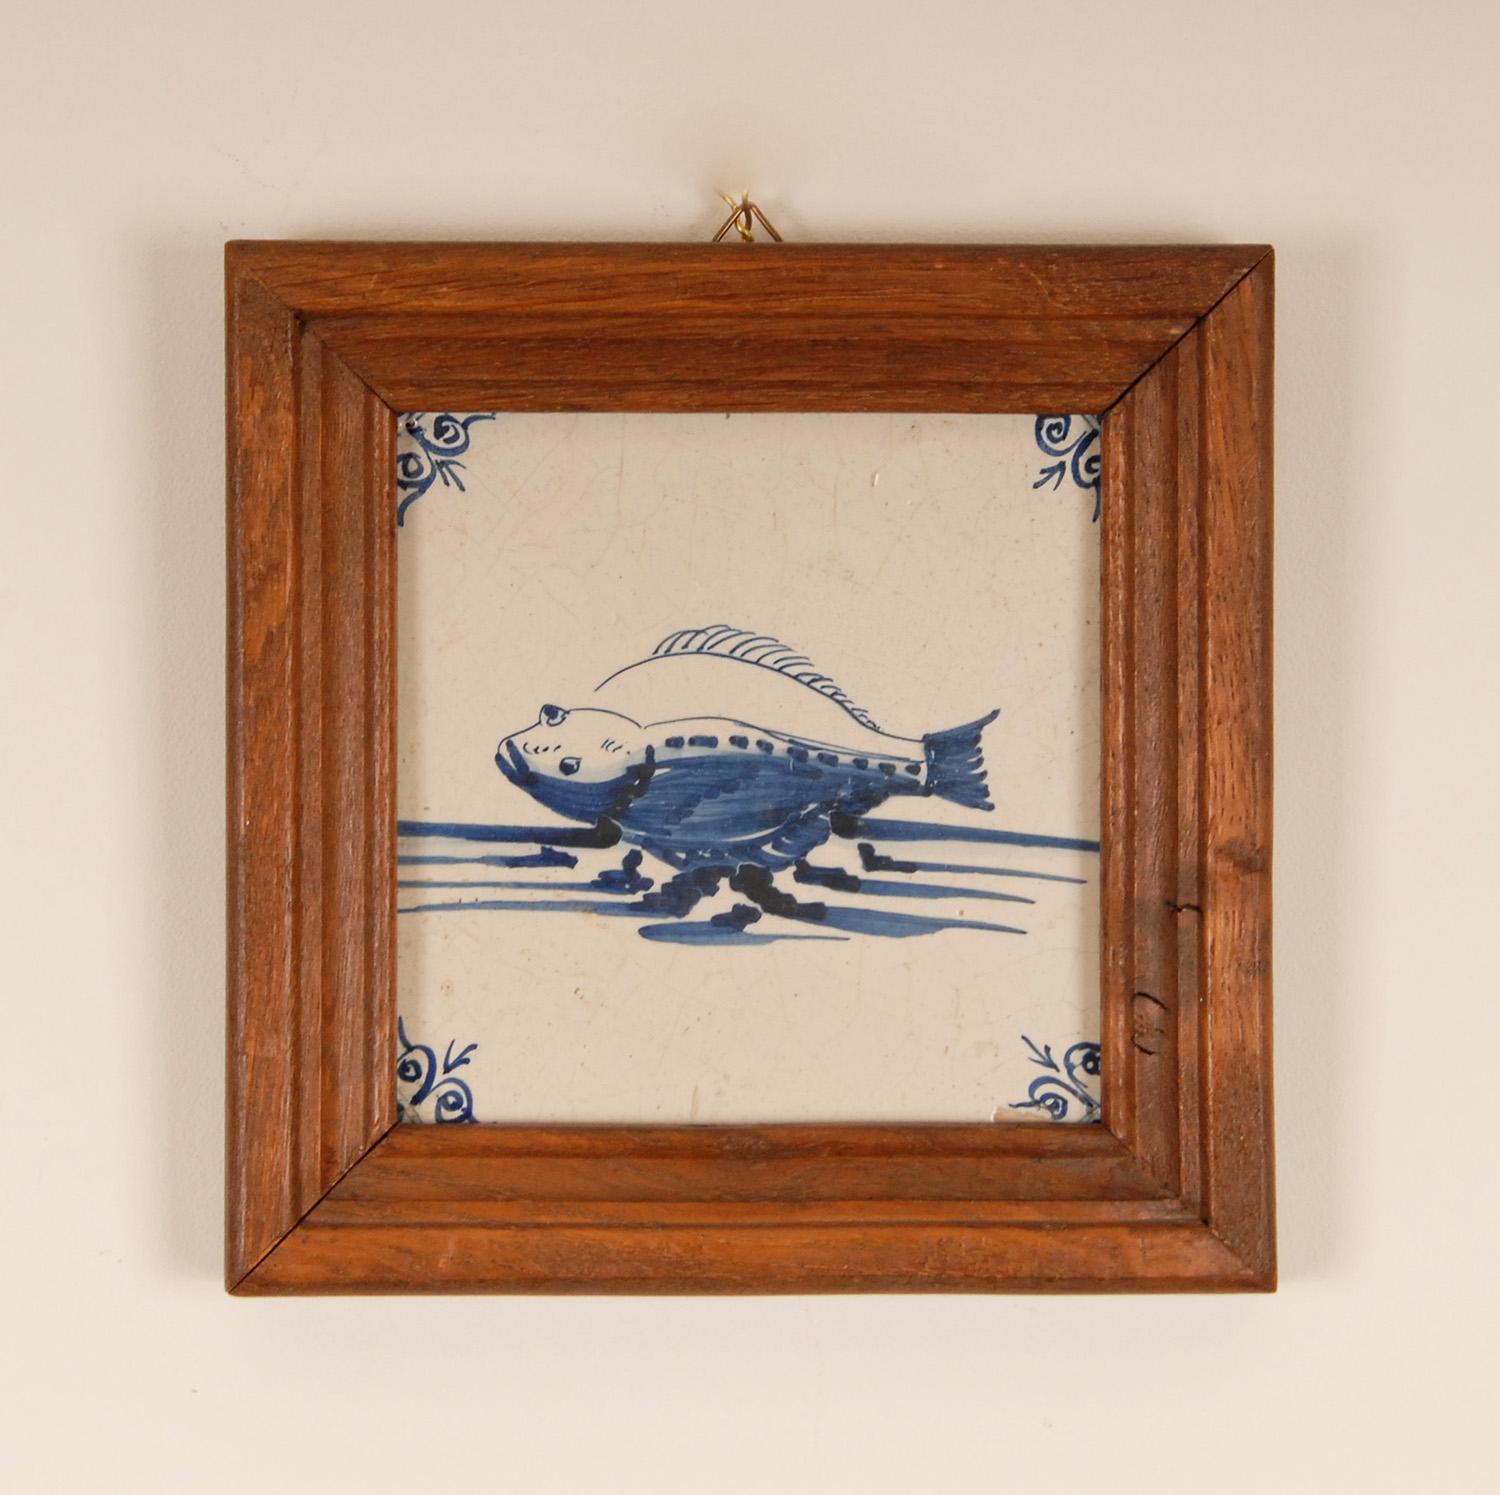 18th Century and Earlier 18th Century Delft Tiles Blue White Sea Creatures Monsters Delft Tiles set of 4 For Sale